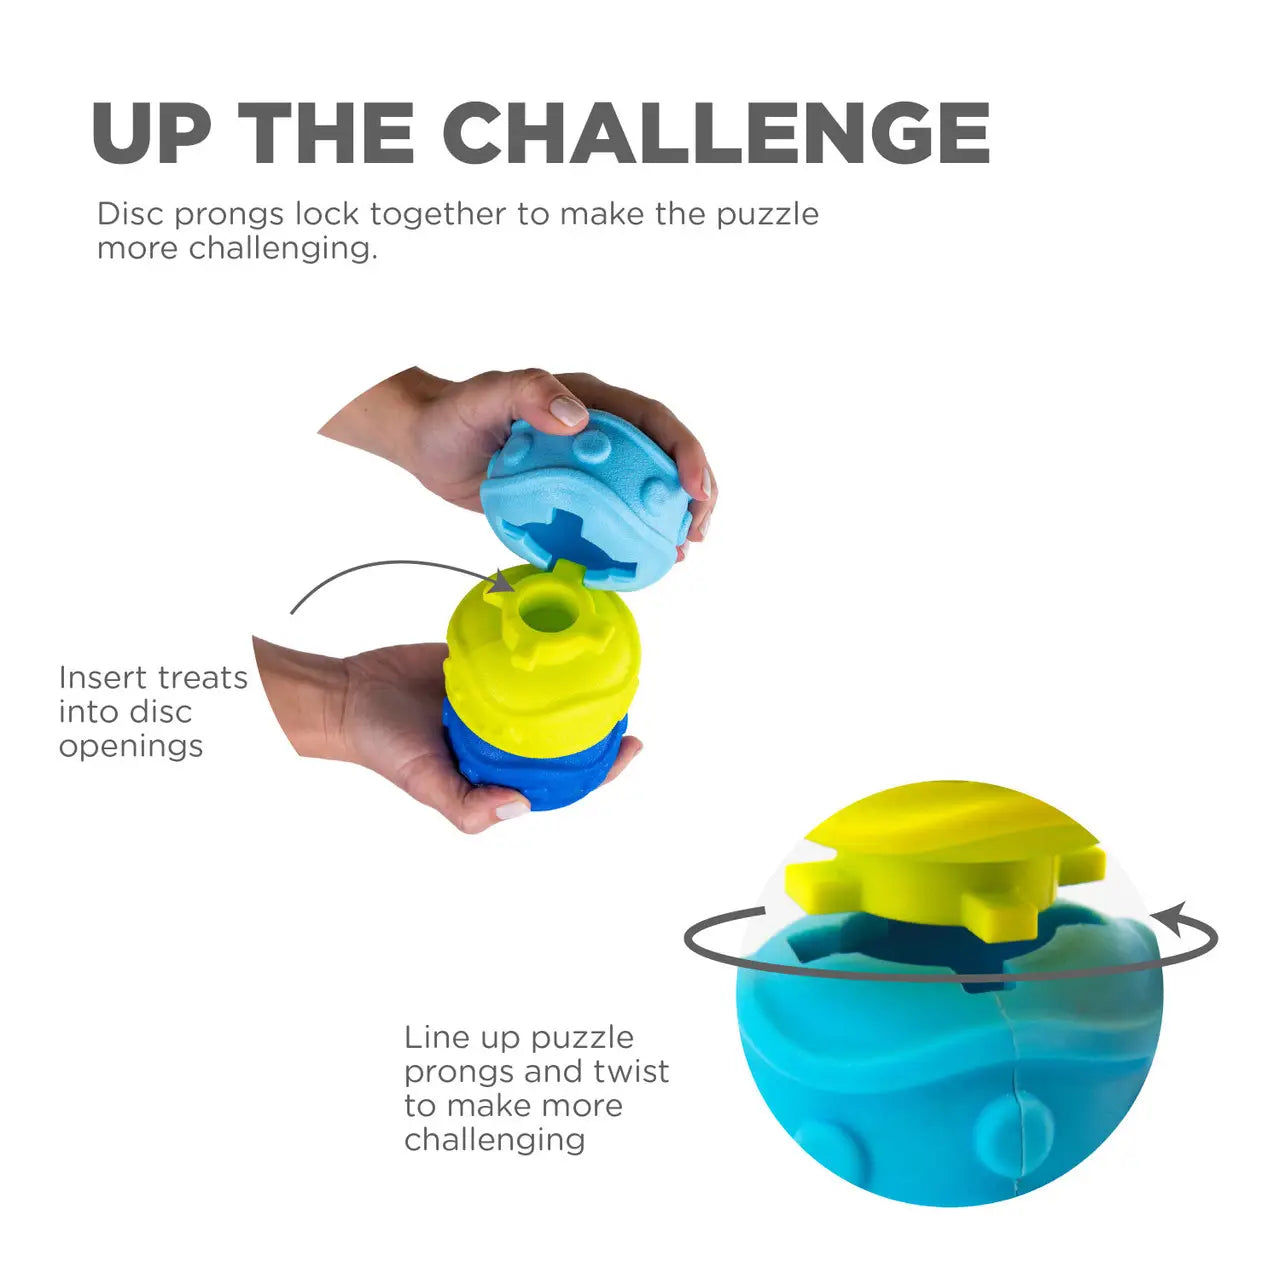 UP THE CHALLENGE Disc prongs lock together to make the puzzle more challenging. Insert treats into disc openings Line up puzzle prongs and twist to make more challenging